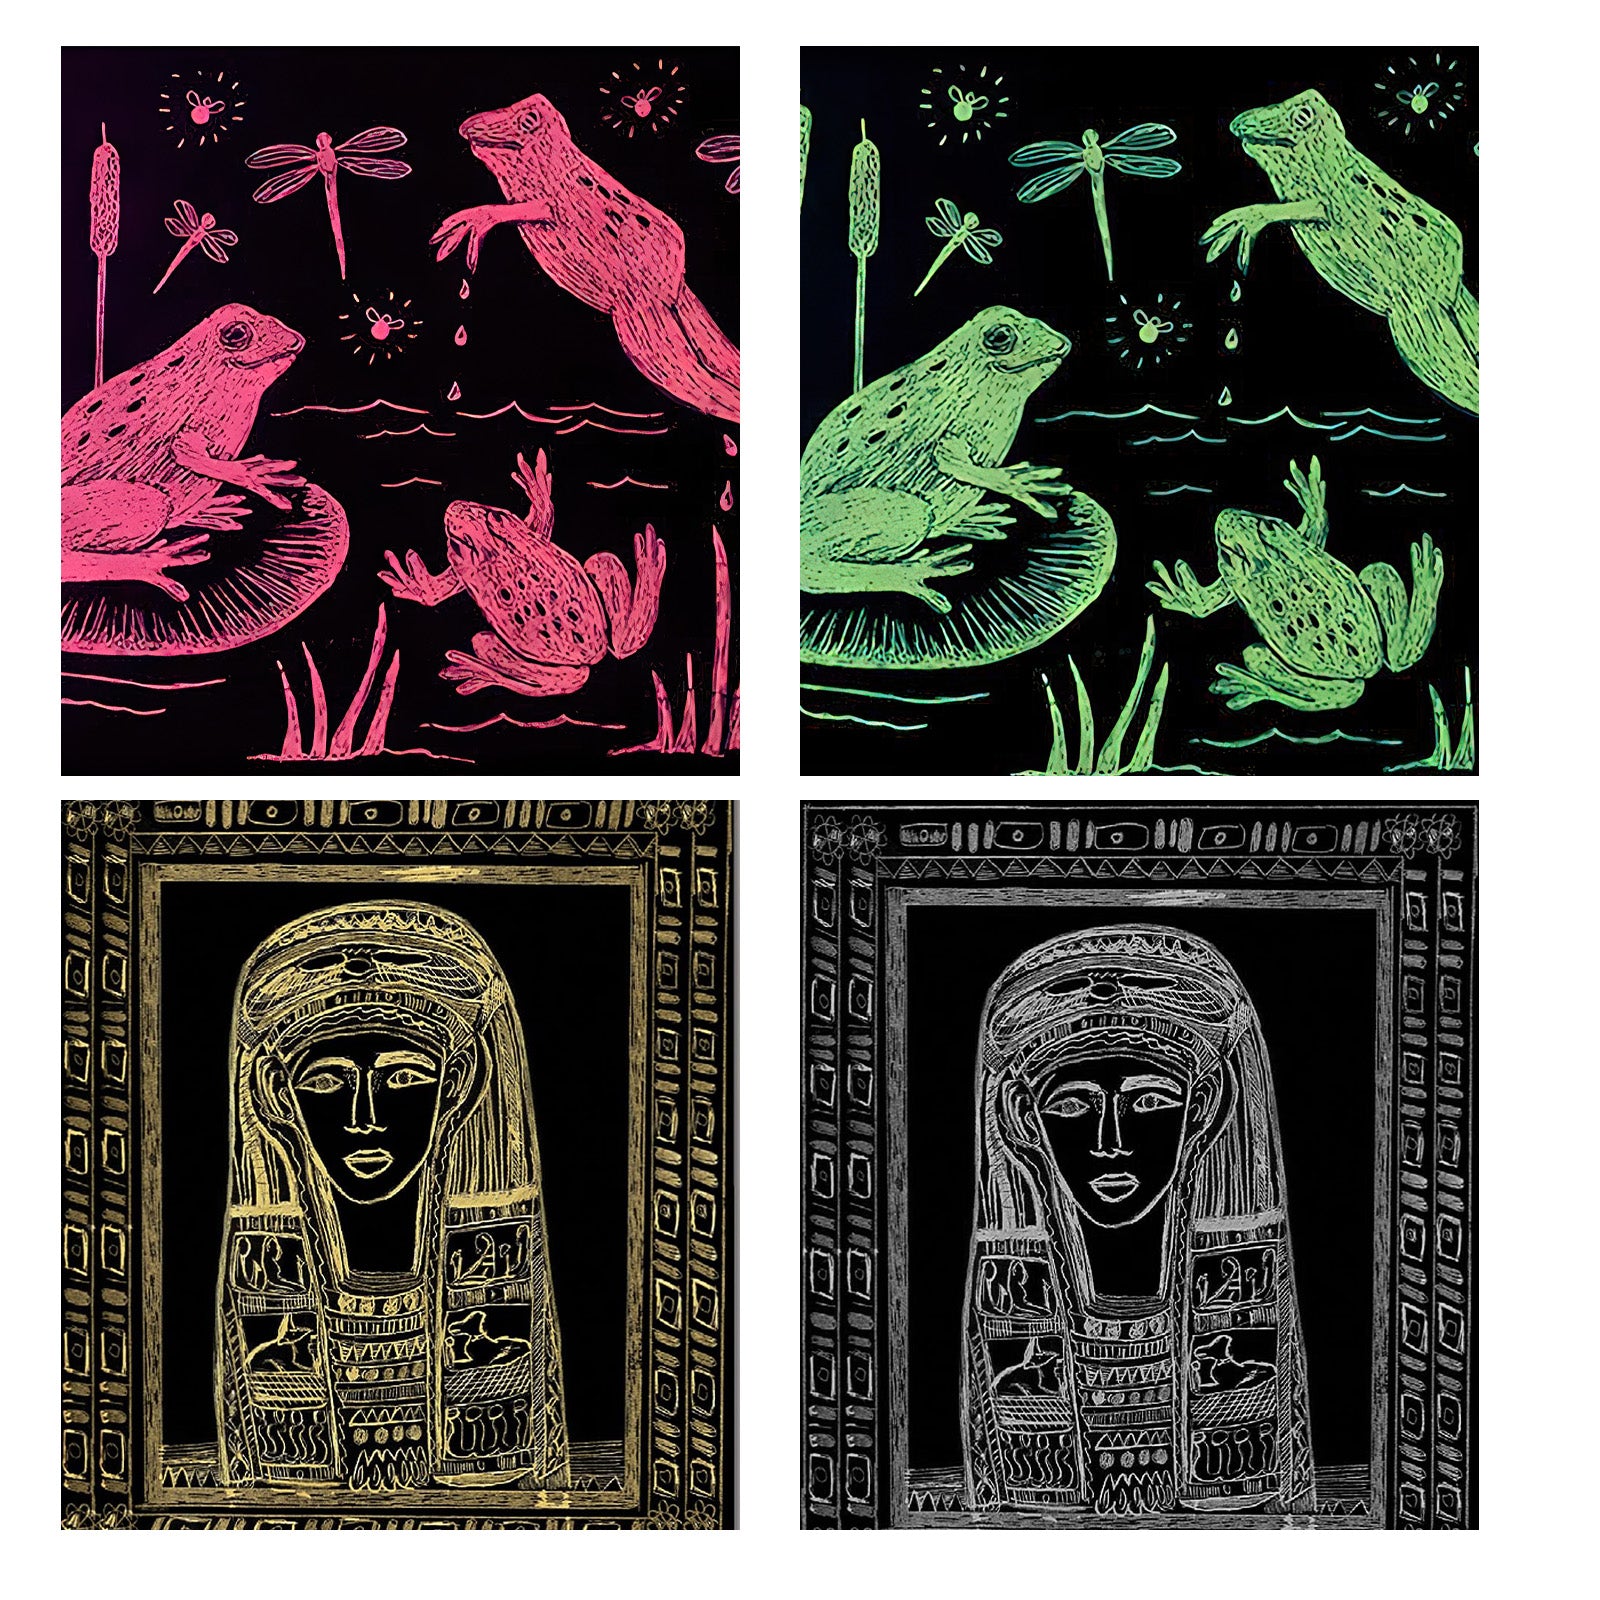 A collage featuring four scratch art drawings. The top two show frogs and dragonflies among reeds, with one frog leaping. The bottom two depict an ancient Egyptian figure, possibly a pharaoh or deity, framed by intricate patterns. Perfect for crafts enthusiasts, the vibrant colors stand out on black backgrounds. This creation is made with 50 Sheets A4 Scratch Paper 5 Colors Scratch Arts Painting Drawing Paper for Falcon Laser Engraving by CrealityFalcon.